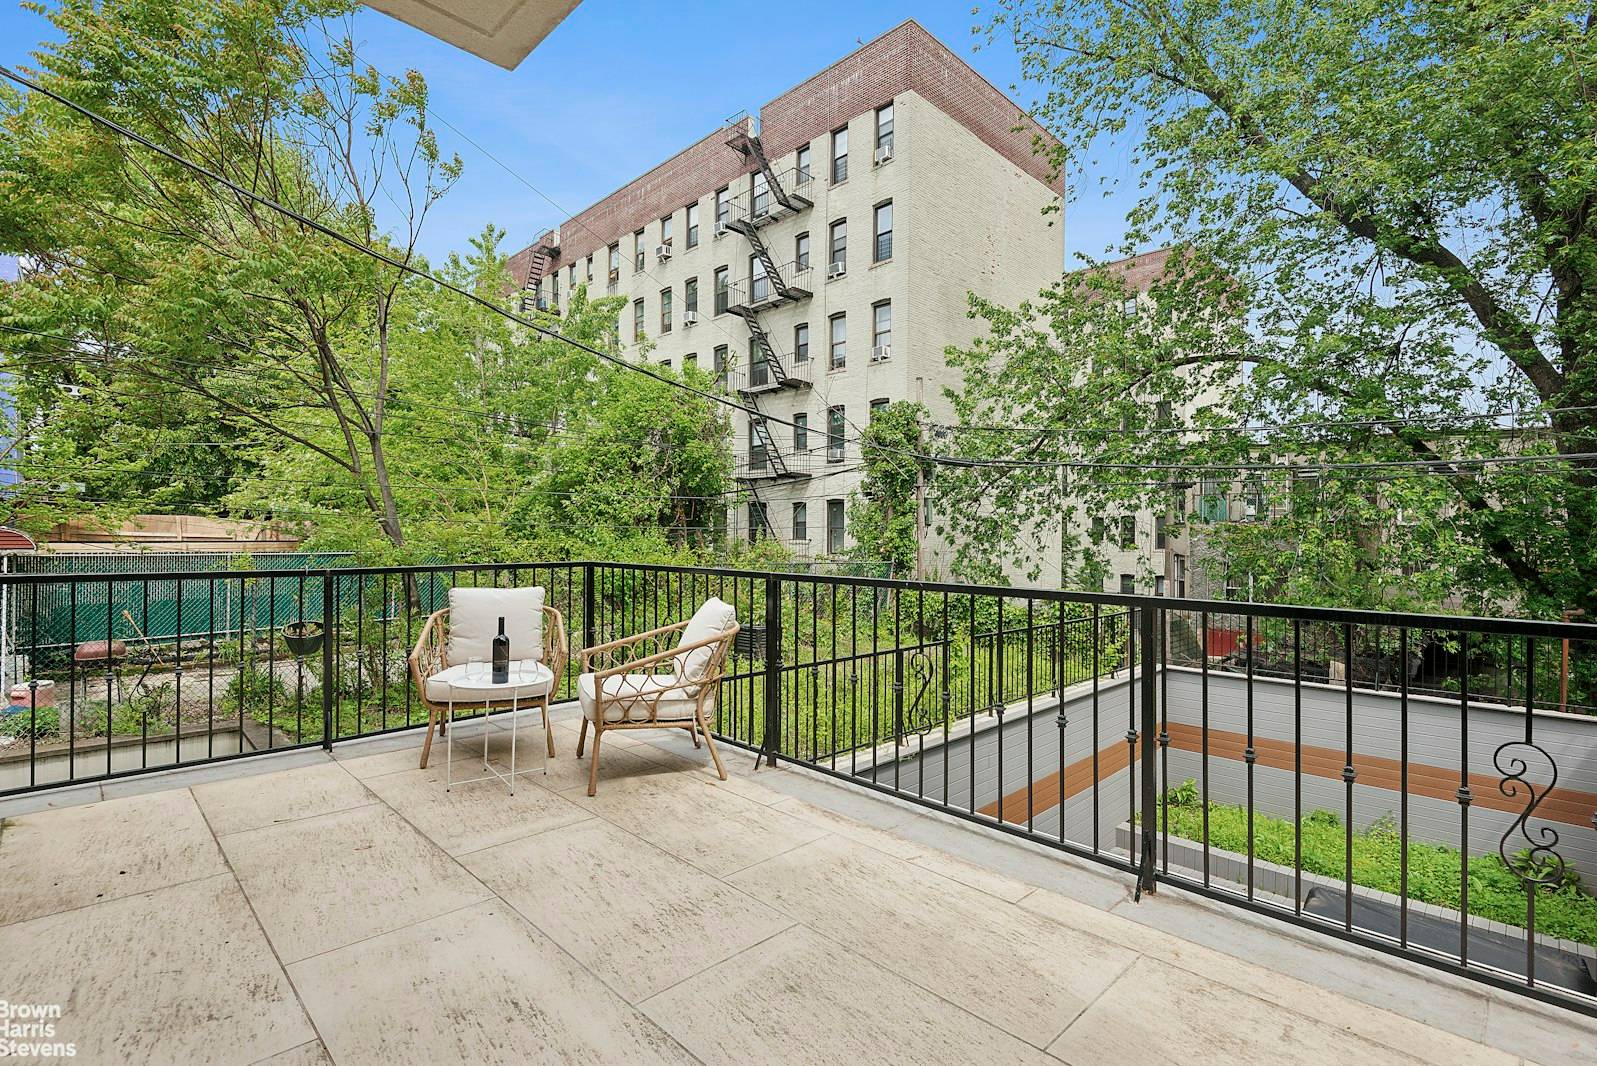 Be the first to rent in the immaculate boutique condo located in central Weeksville Brooklyn.